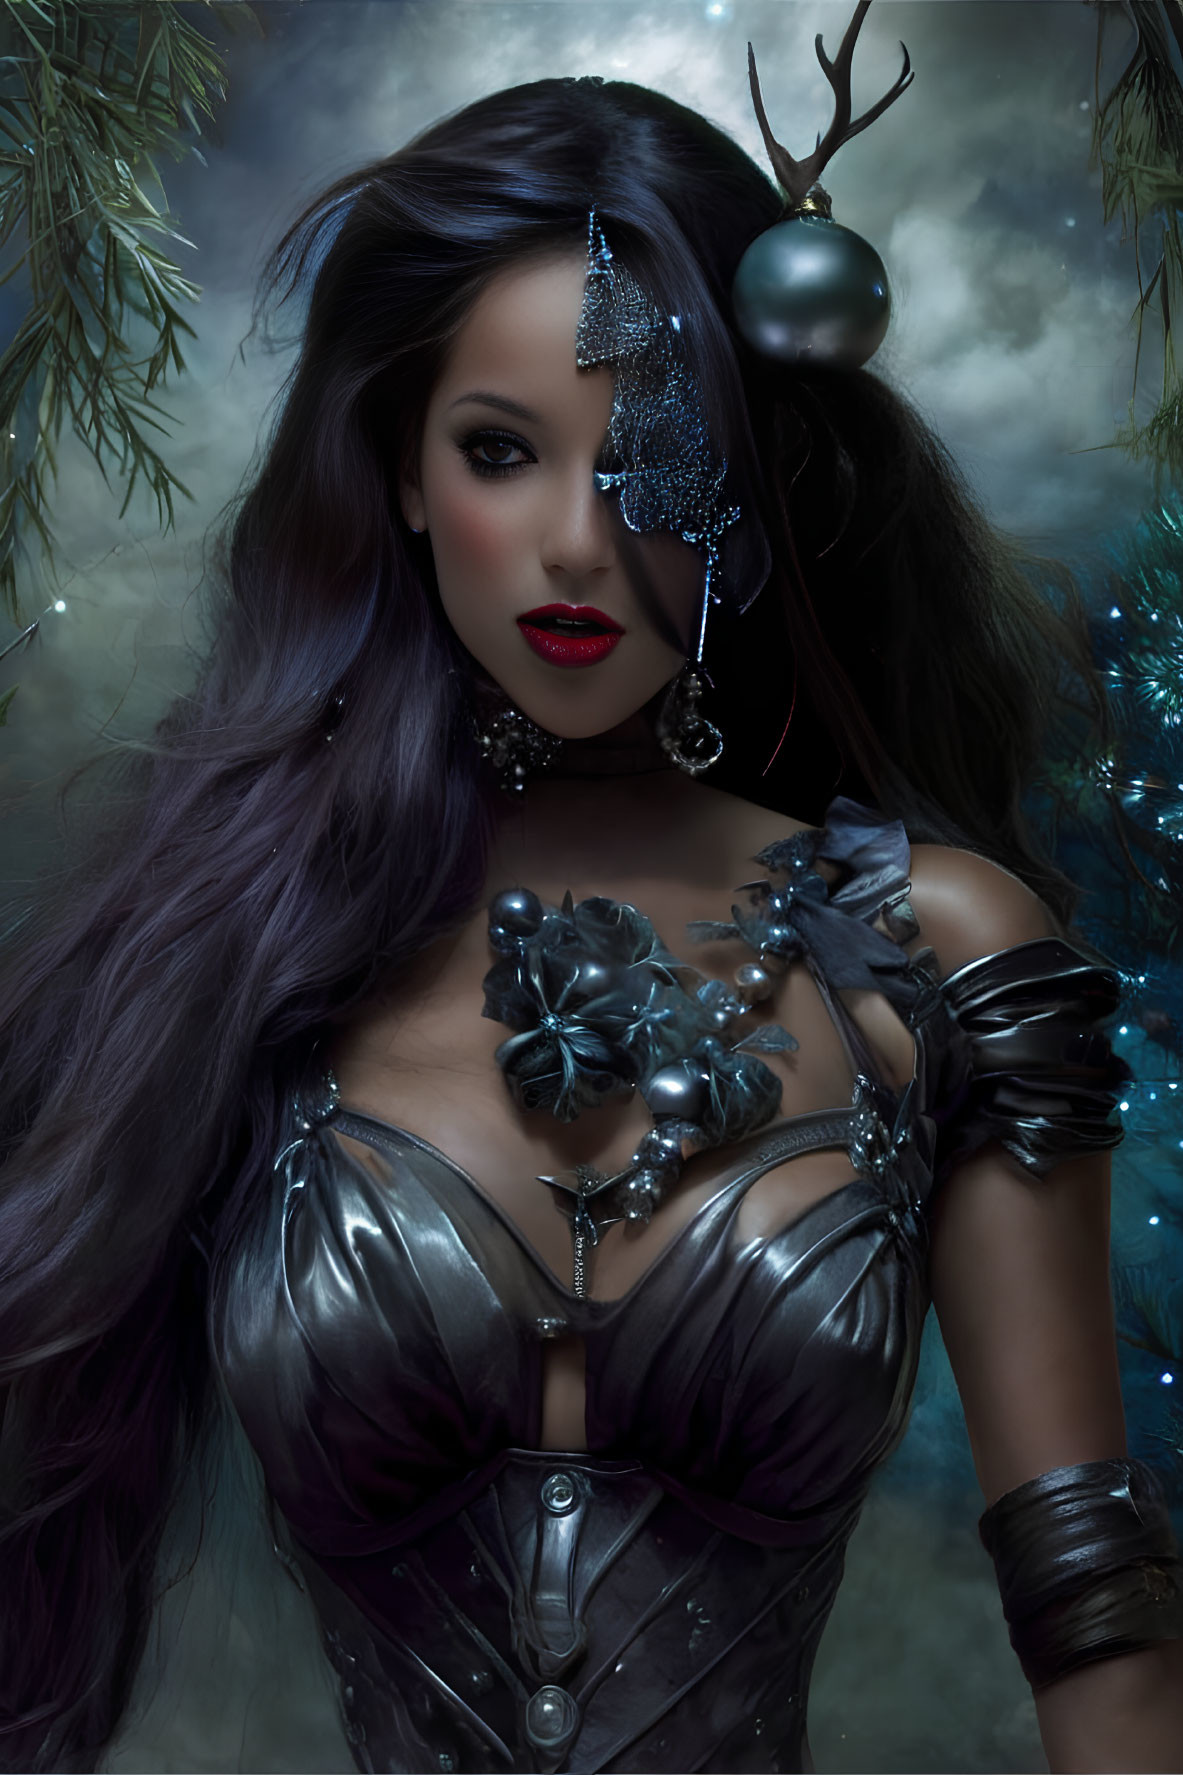 Dark-haired woman in red lipstick with silver armor and veil in mystical forest.